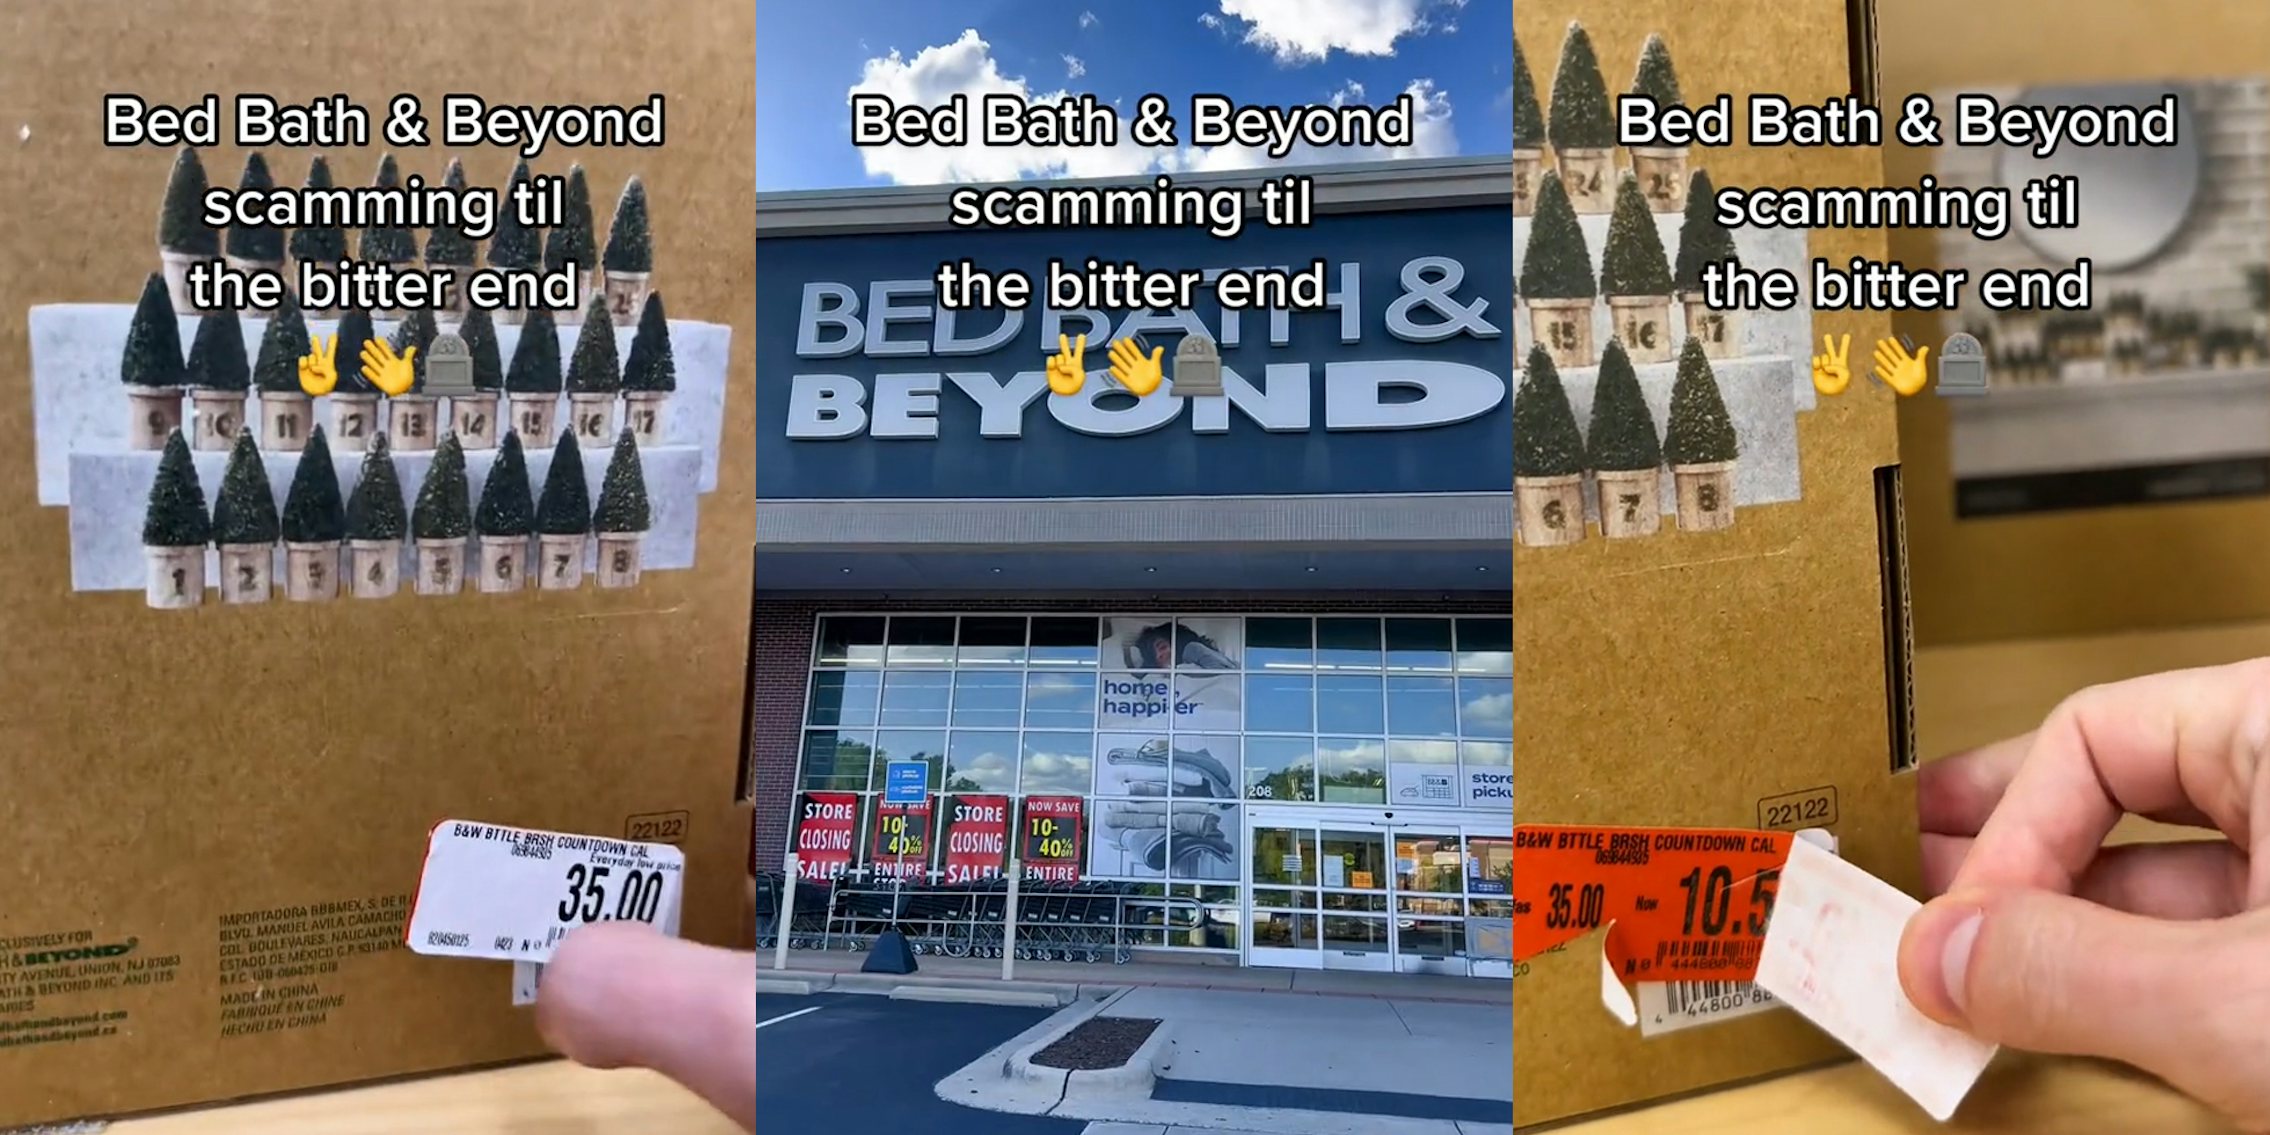 Bed Bath & Beyond item with $35 dollar price tag with caption 'Bed Bath & Beyond scamming til the bitter end' (l) Bed Bath & Beyond entrance with signs with caption 'Bed Bath & Beyond scamming til the bitter end' (c) Bed Bath & Beyond item with $35 dollar price tag being peeled to reveal $10 tag with caption 'Bed Bath & Beyond scamming til the bitter end' (r)